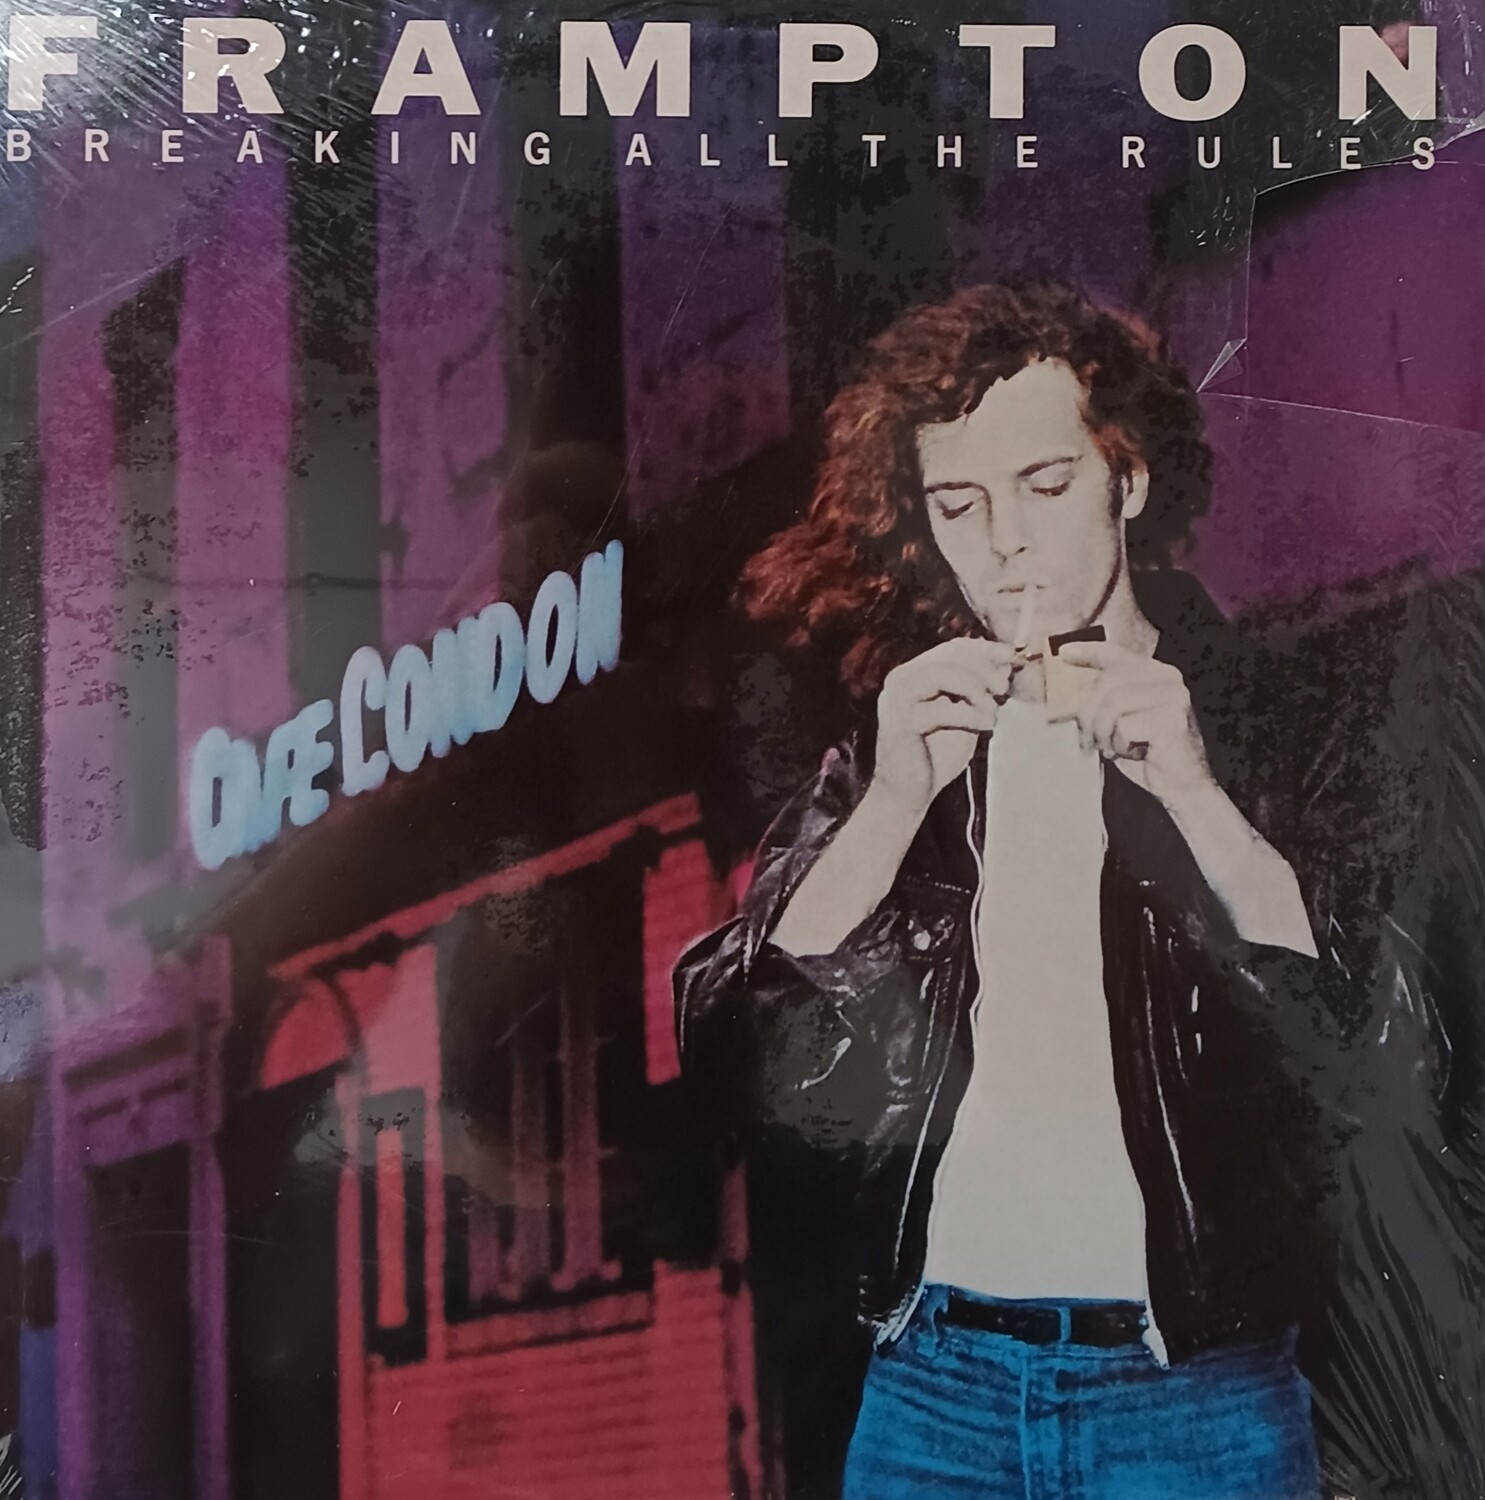 Peter Frampton - Breaking all the rules (SCELLÉ)